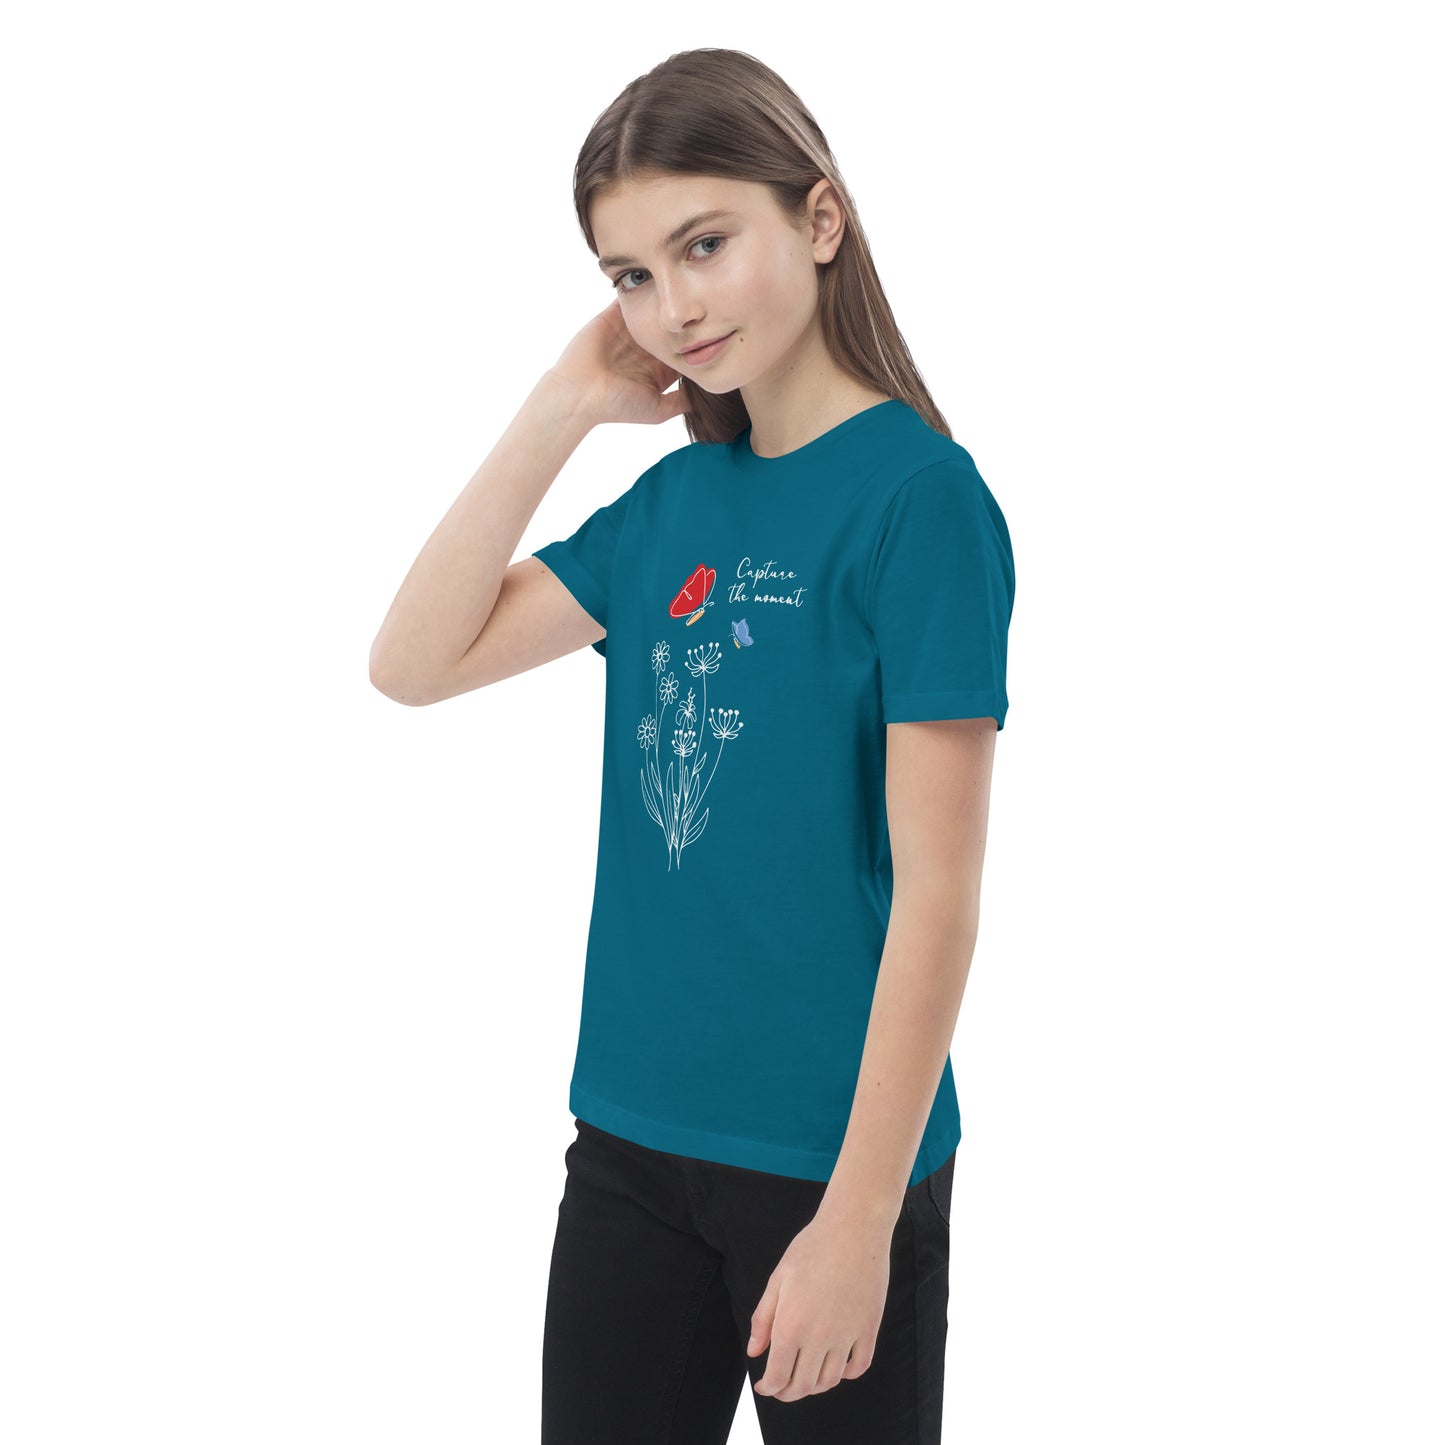 Capture the moment butterfly - Organic cotton kids t-shirt - HobbyMeFree